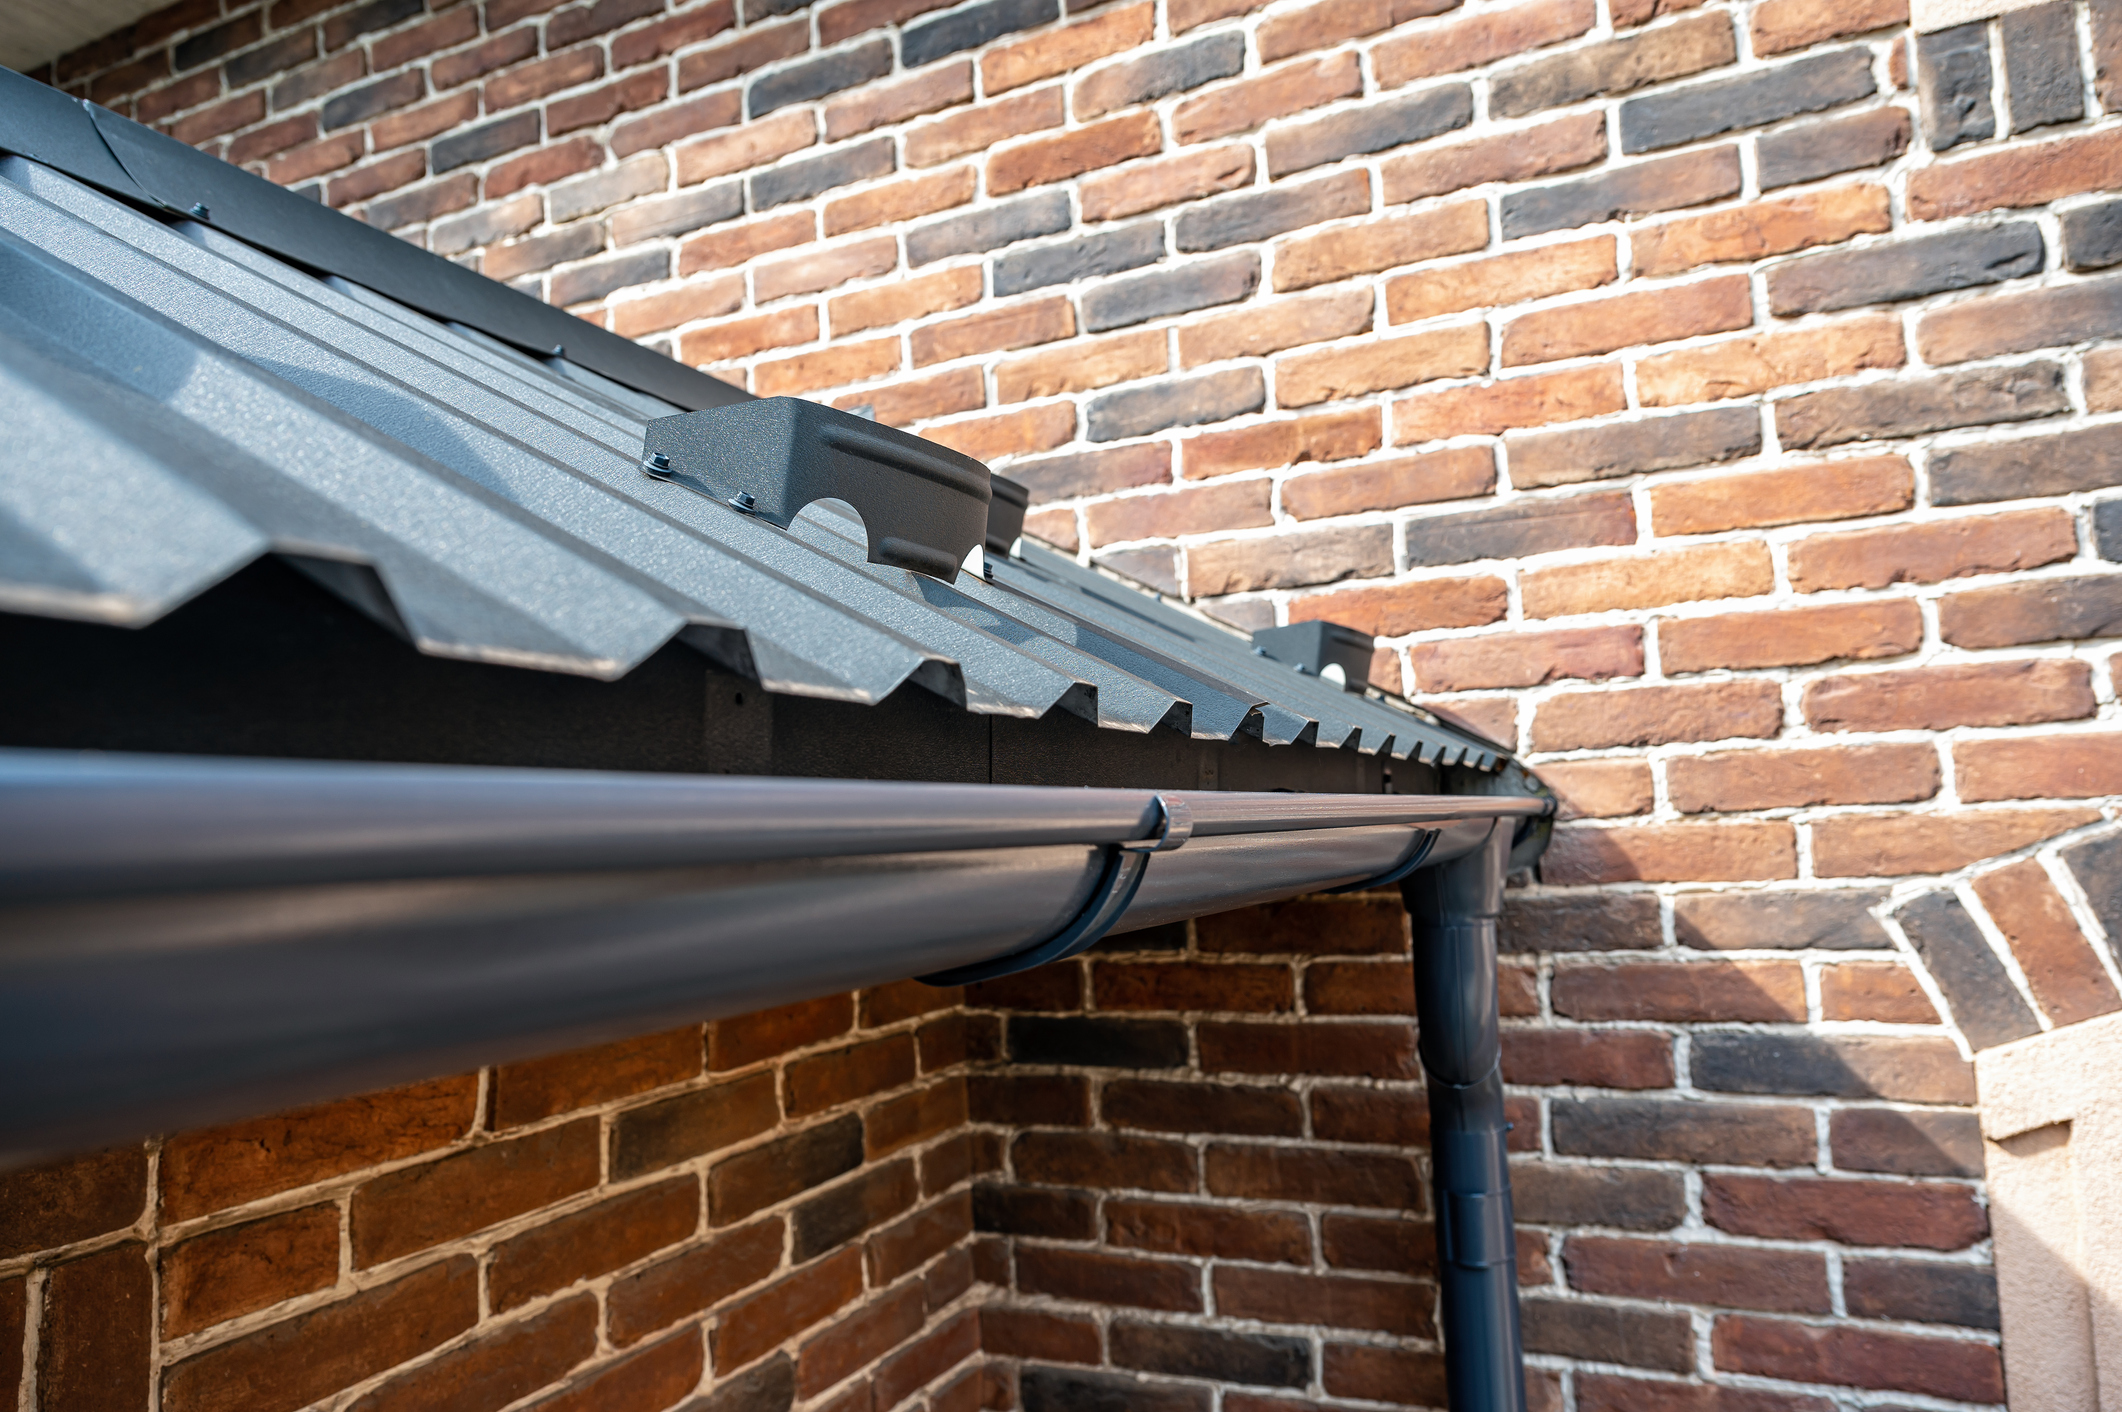 Gutter system for a metal roof.